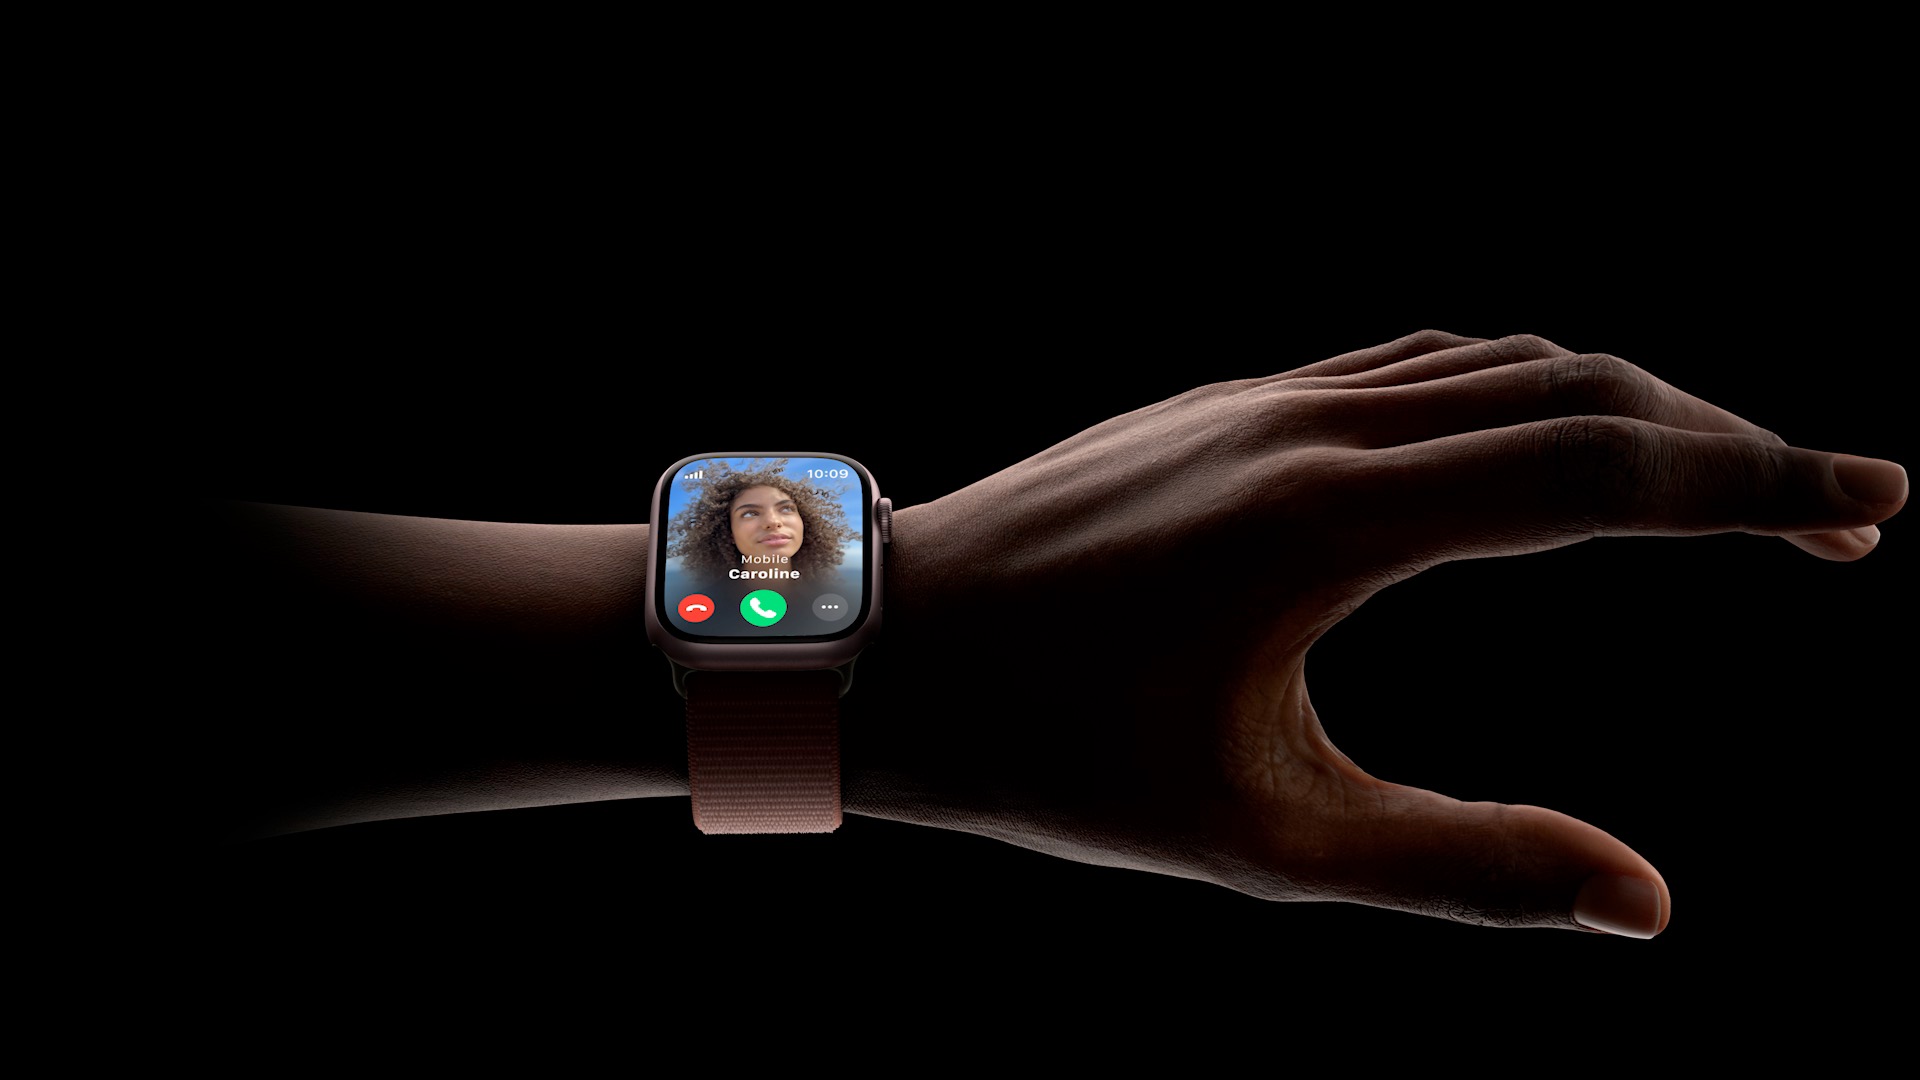 Why was the Sale of Apple Watch Banned? Let's Understand the Controversy